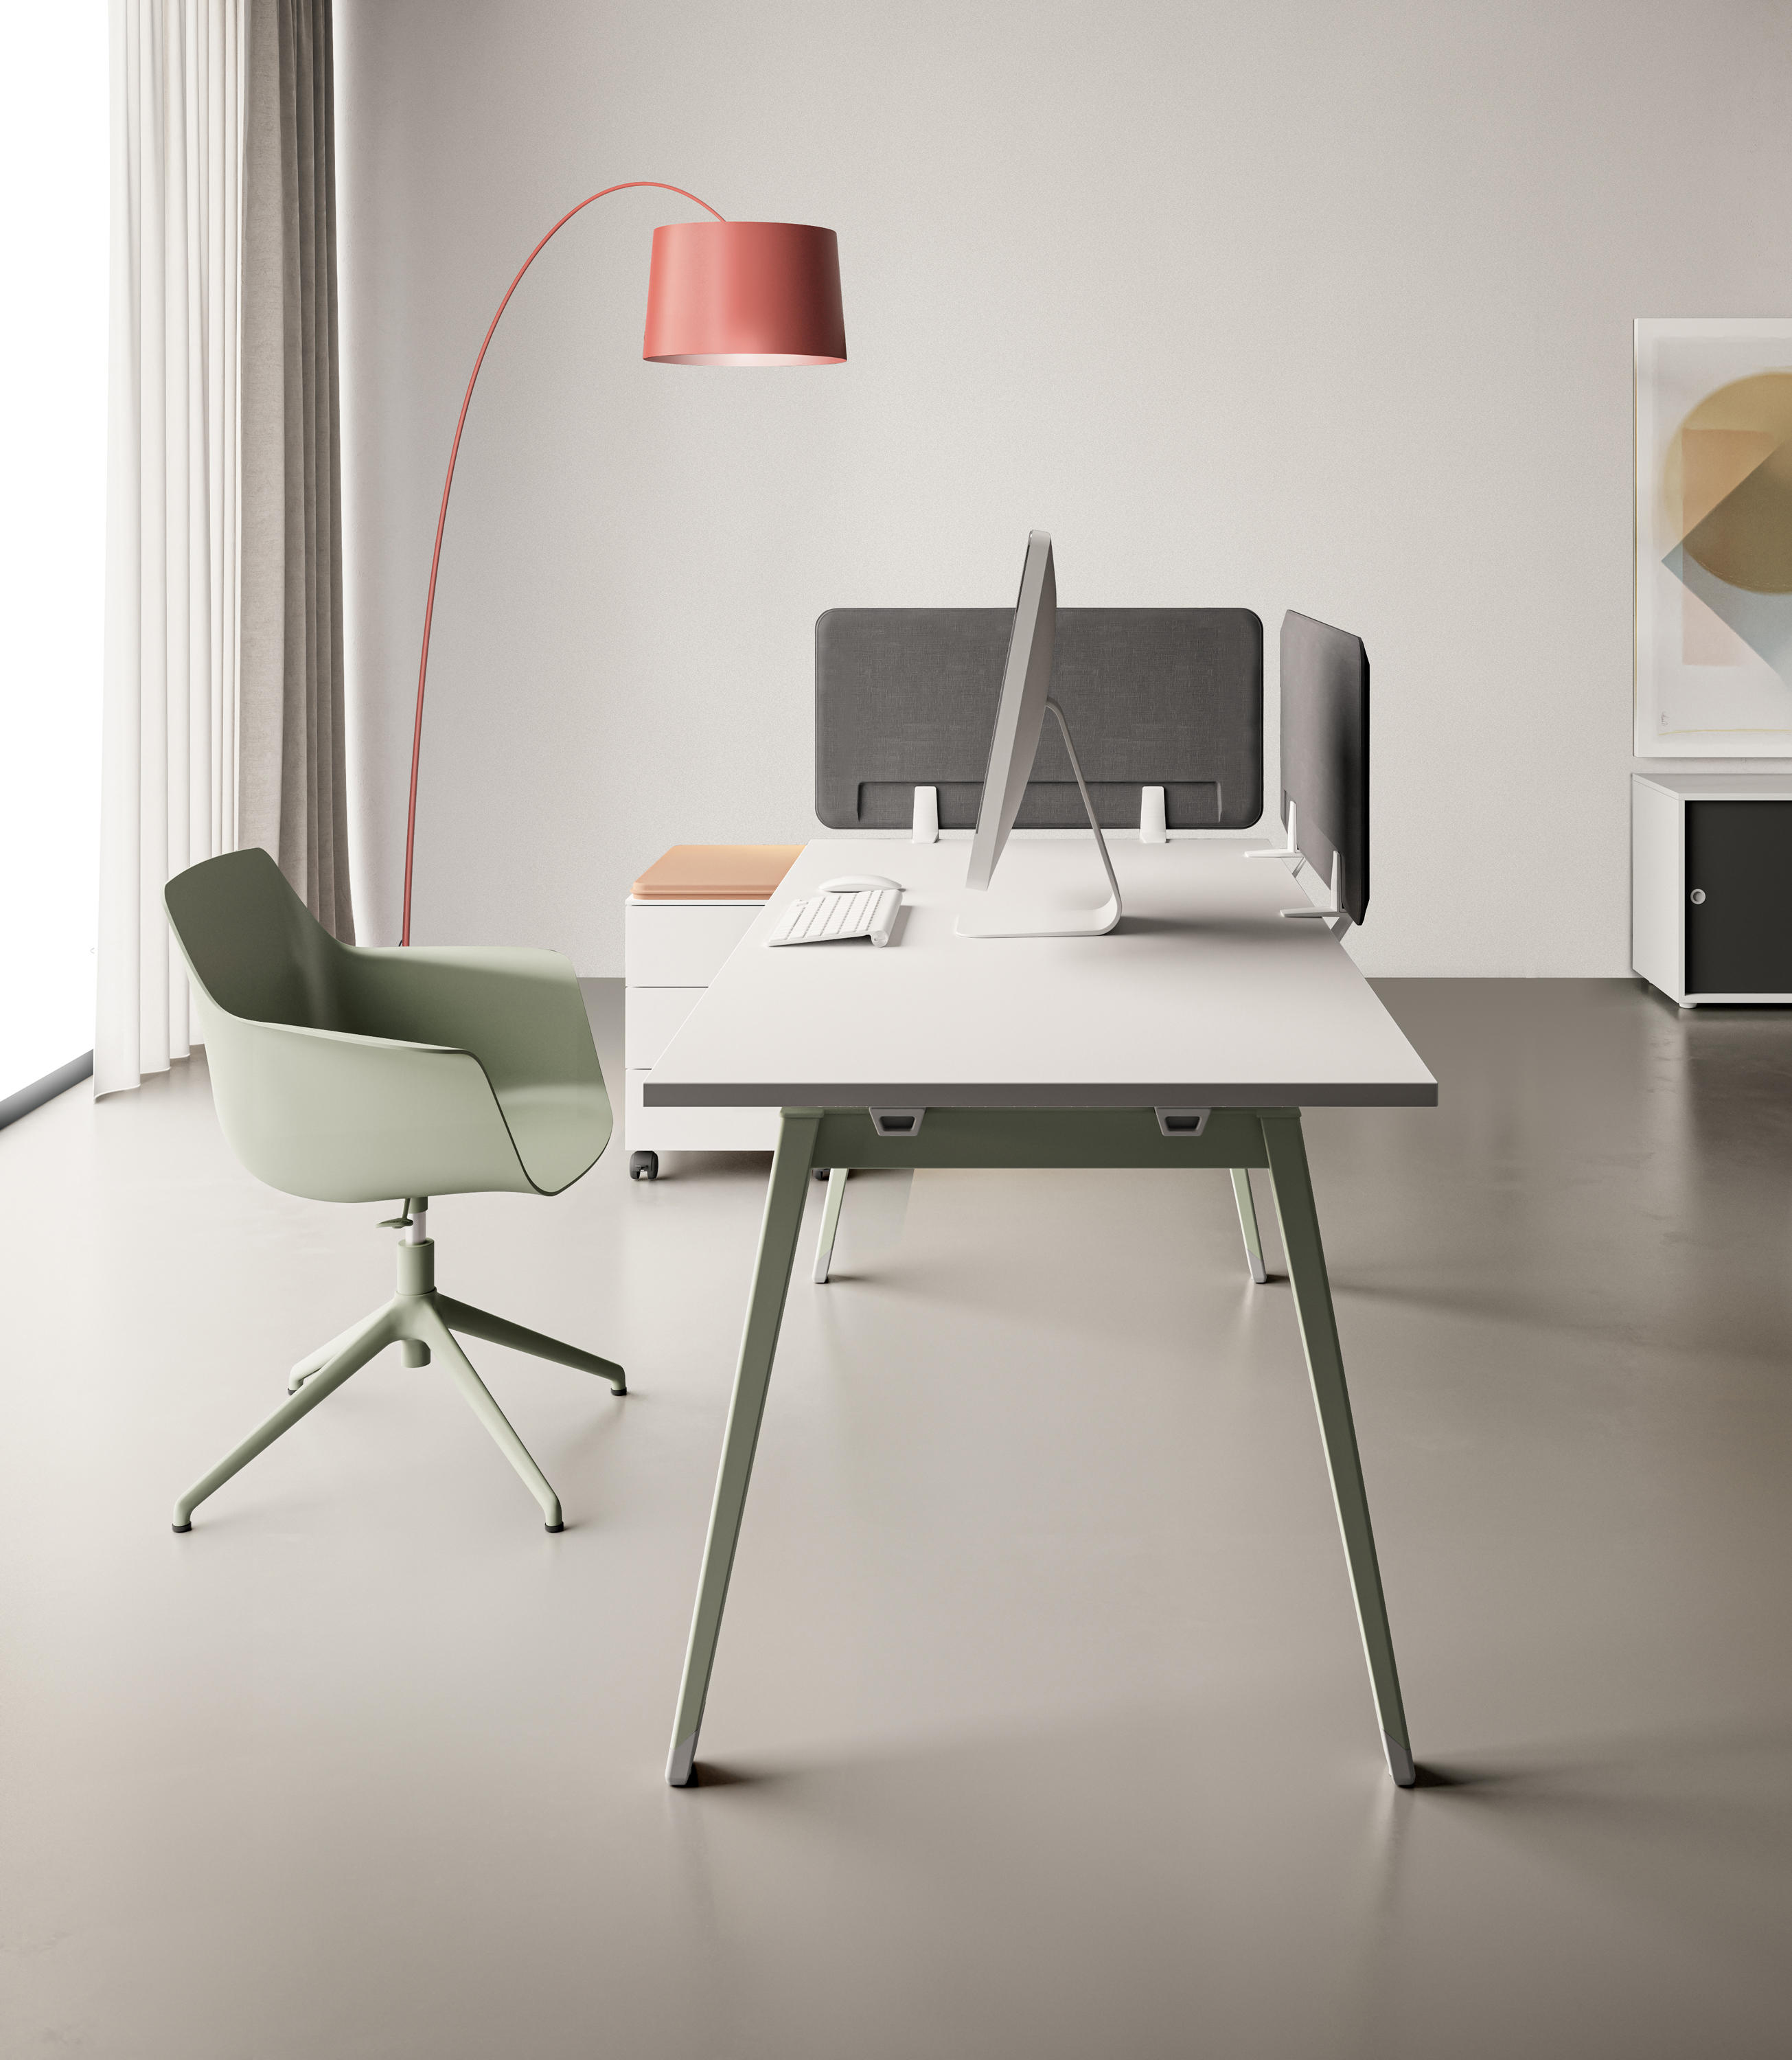 HOME OFFICE SOLUTIONS & designer furniture | Architonic